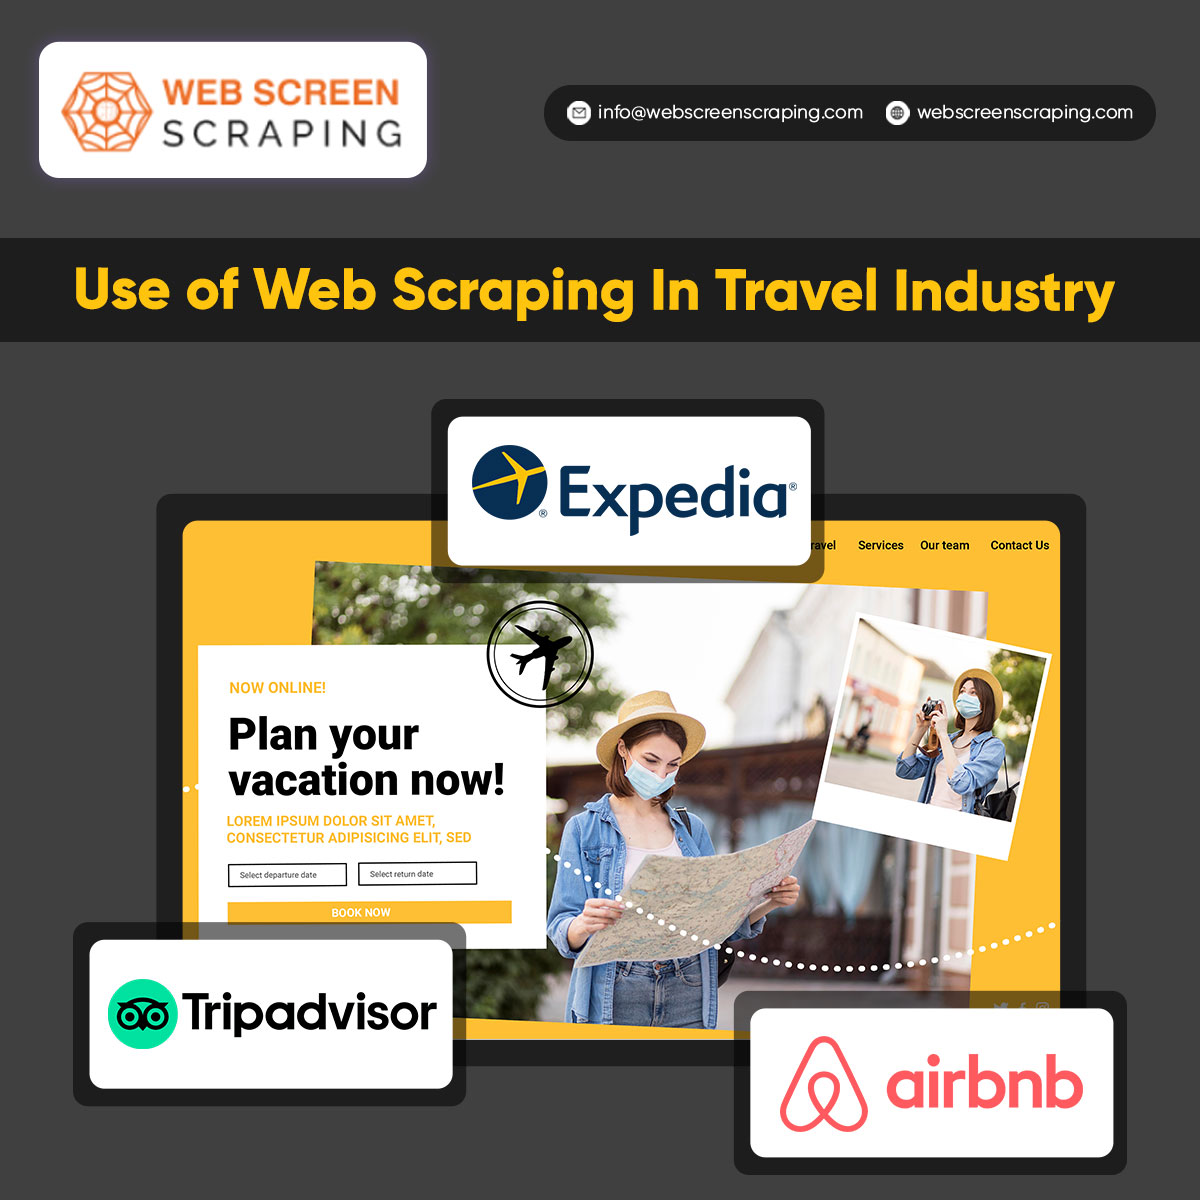 Unleash the power of #WebExtraction in travel! Discover smart ways to boost efficiency and offer top-notch experiences!

webscreenscraping.com/web-extraction…

#traveltech #dataautomation #travel #travelindustrydatascraping #webscrapingfortravel #webscreenscraping